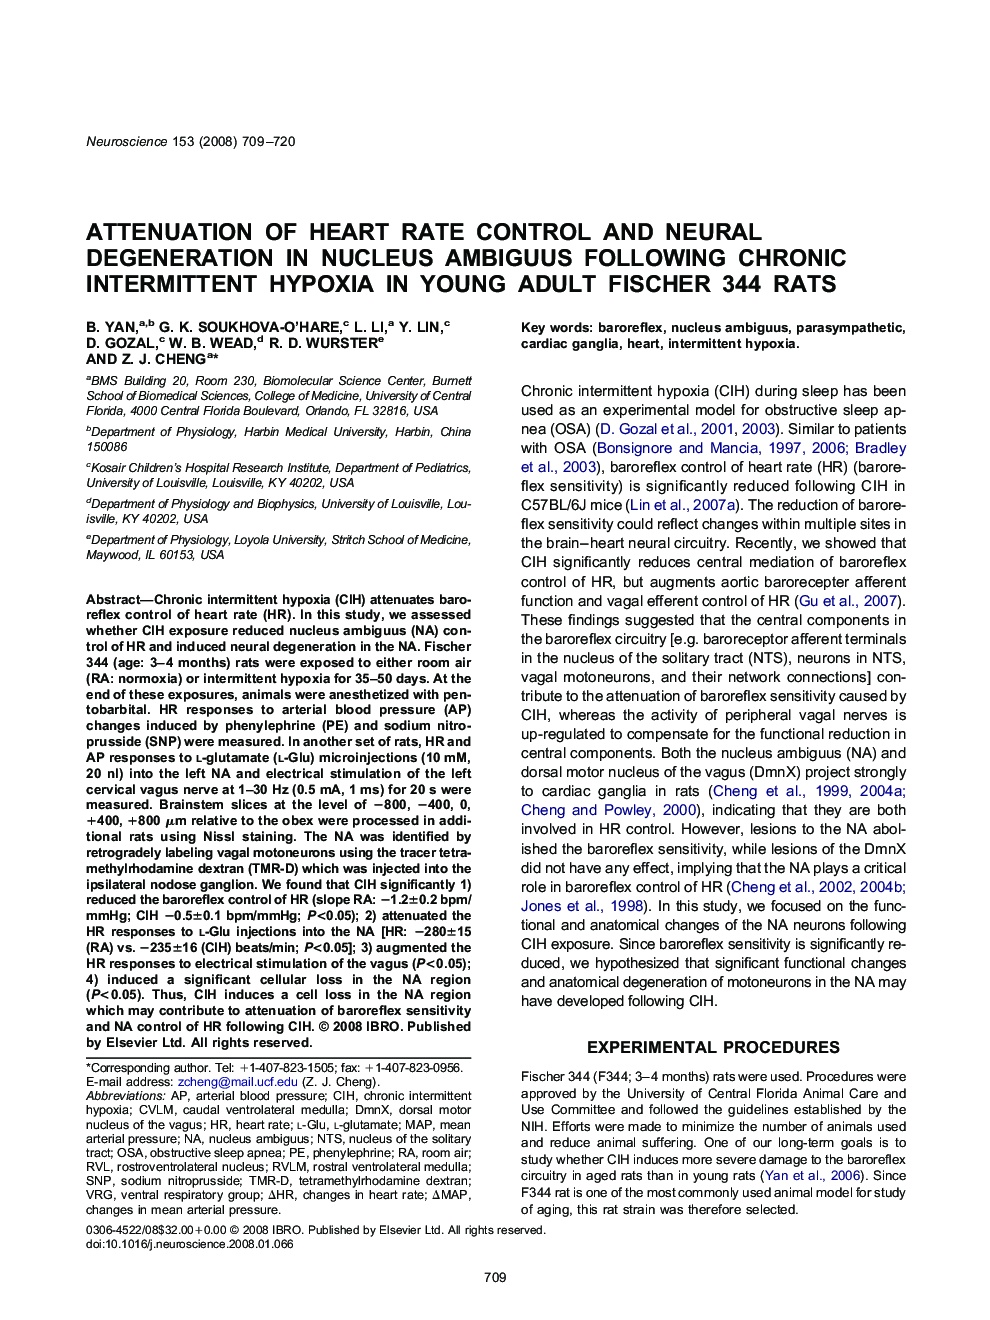 Attenuation of heart rate control and neural degeneration in nucleus ambiguus following chronic intermittent hypoxia in young adult Fischer 344 rats